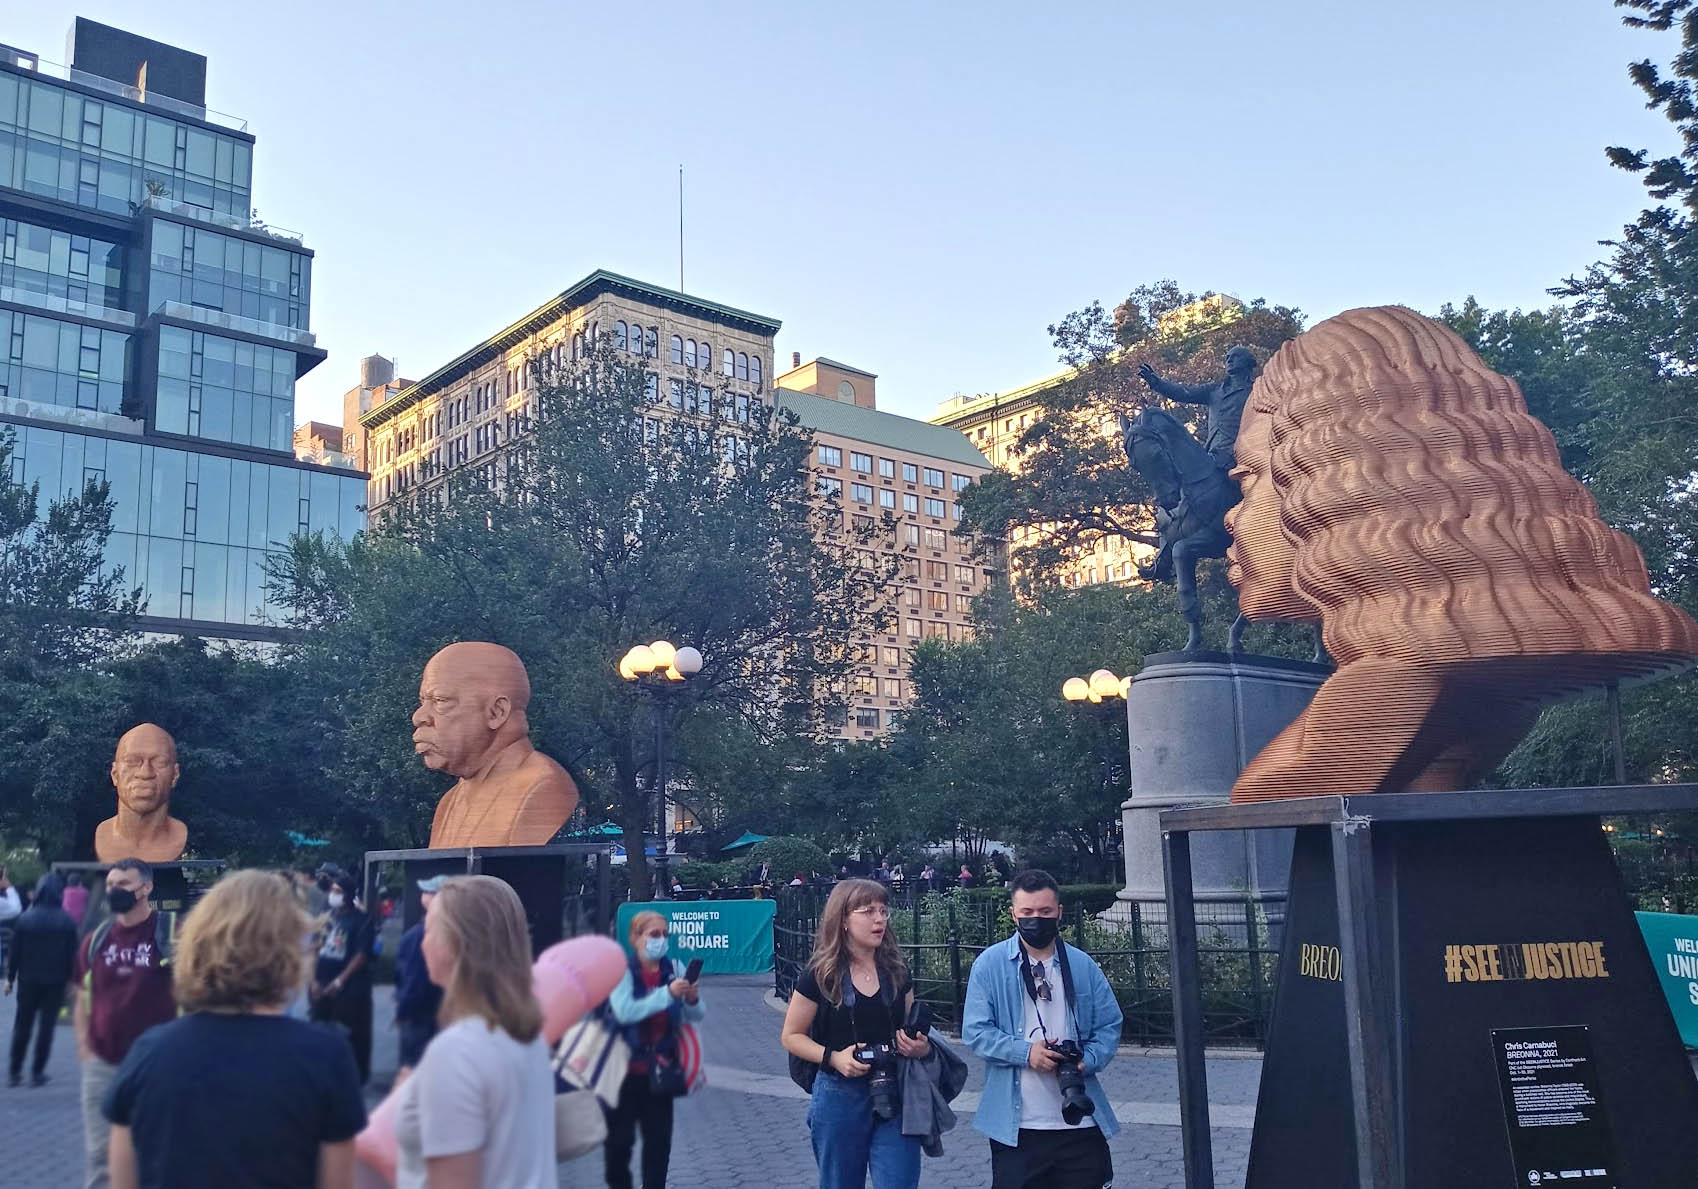 Art exhibit for Black lives in Union Square NYC